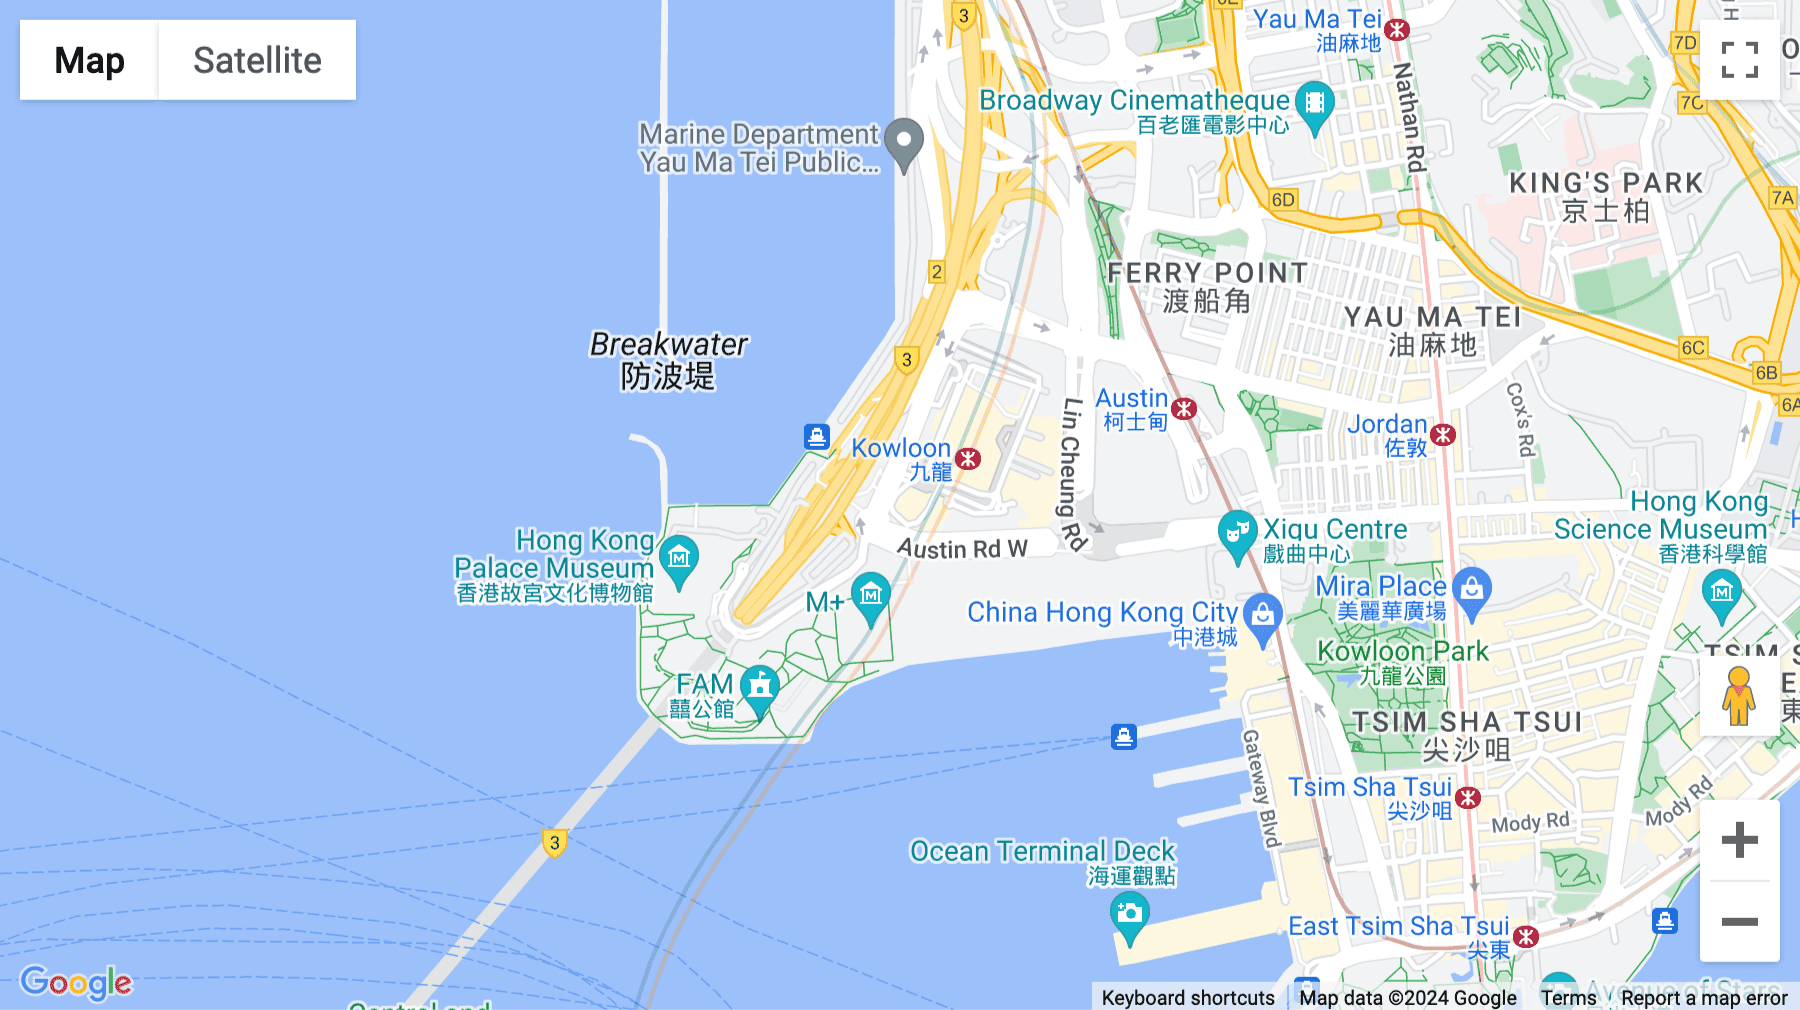 Click for interative map of 86th Floor, International Commerce Centre, 1 Austin Road West, Hong Kong